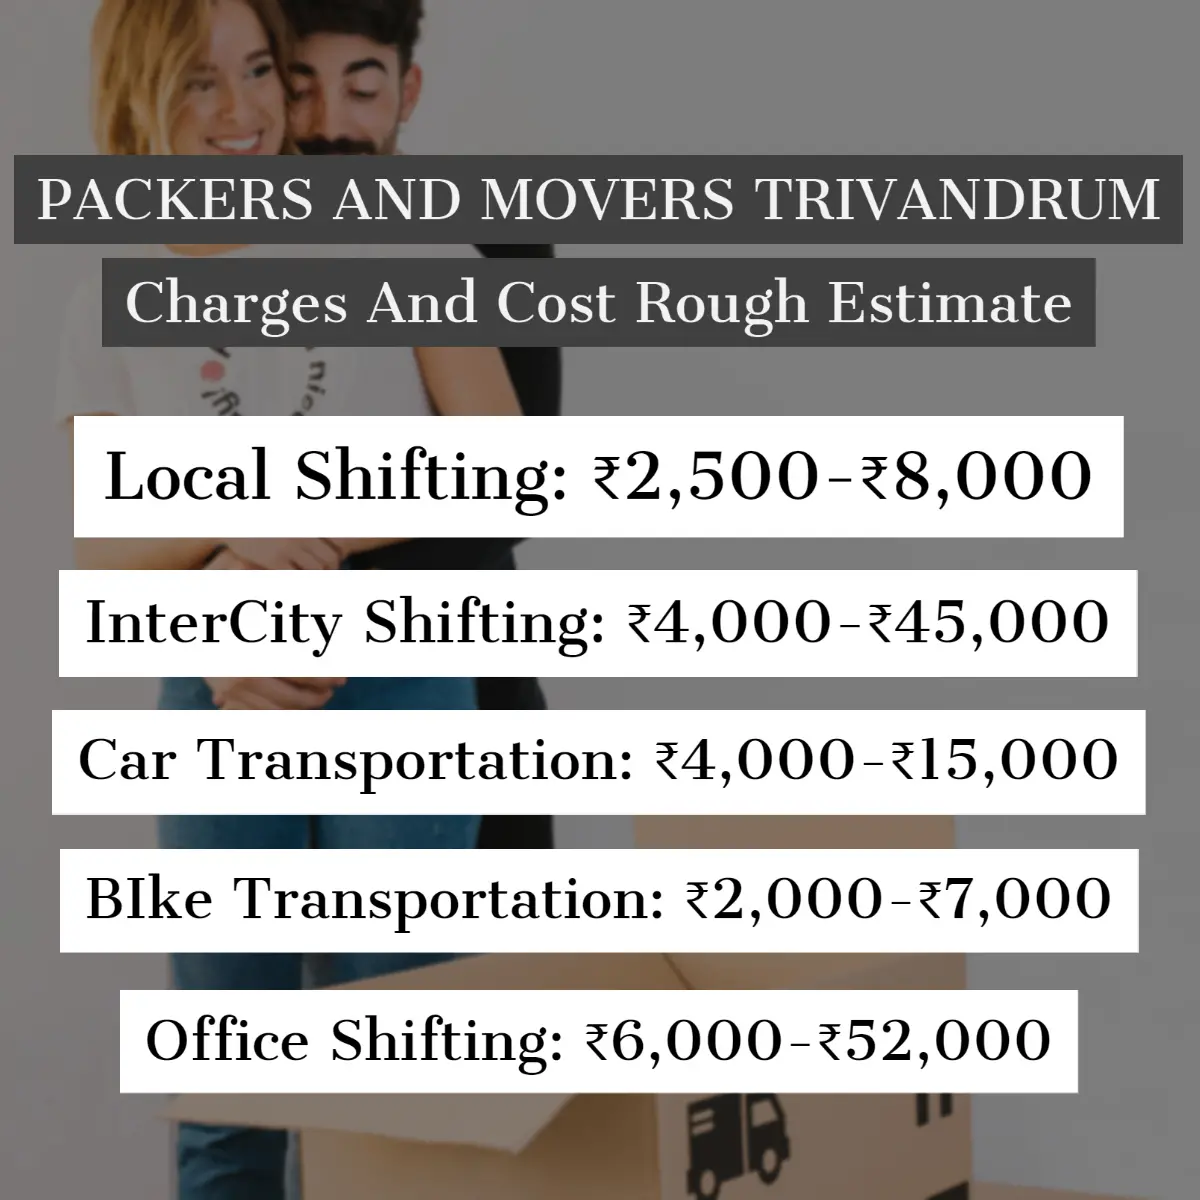 Packers and Movers Trivandrum Charges